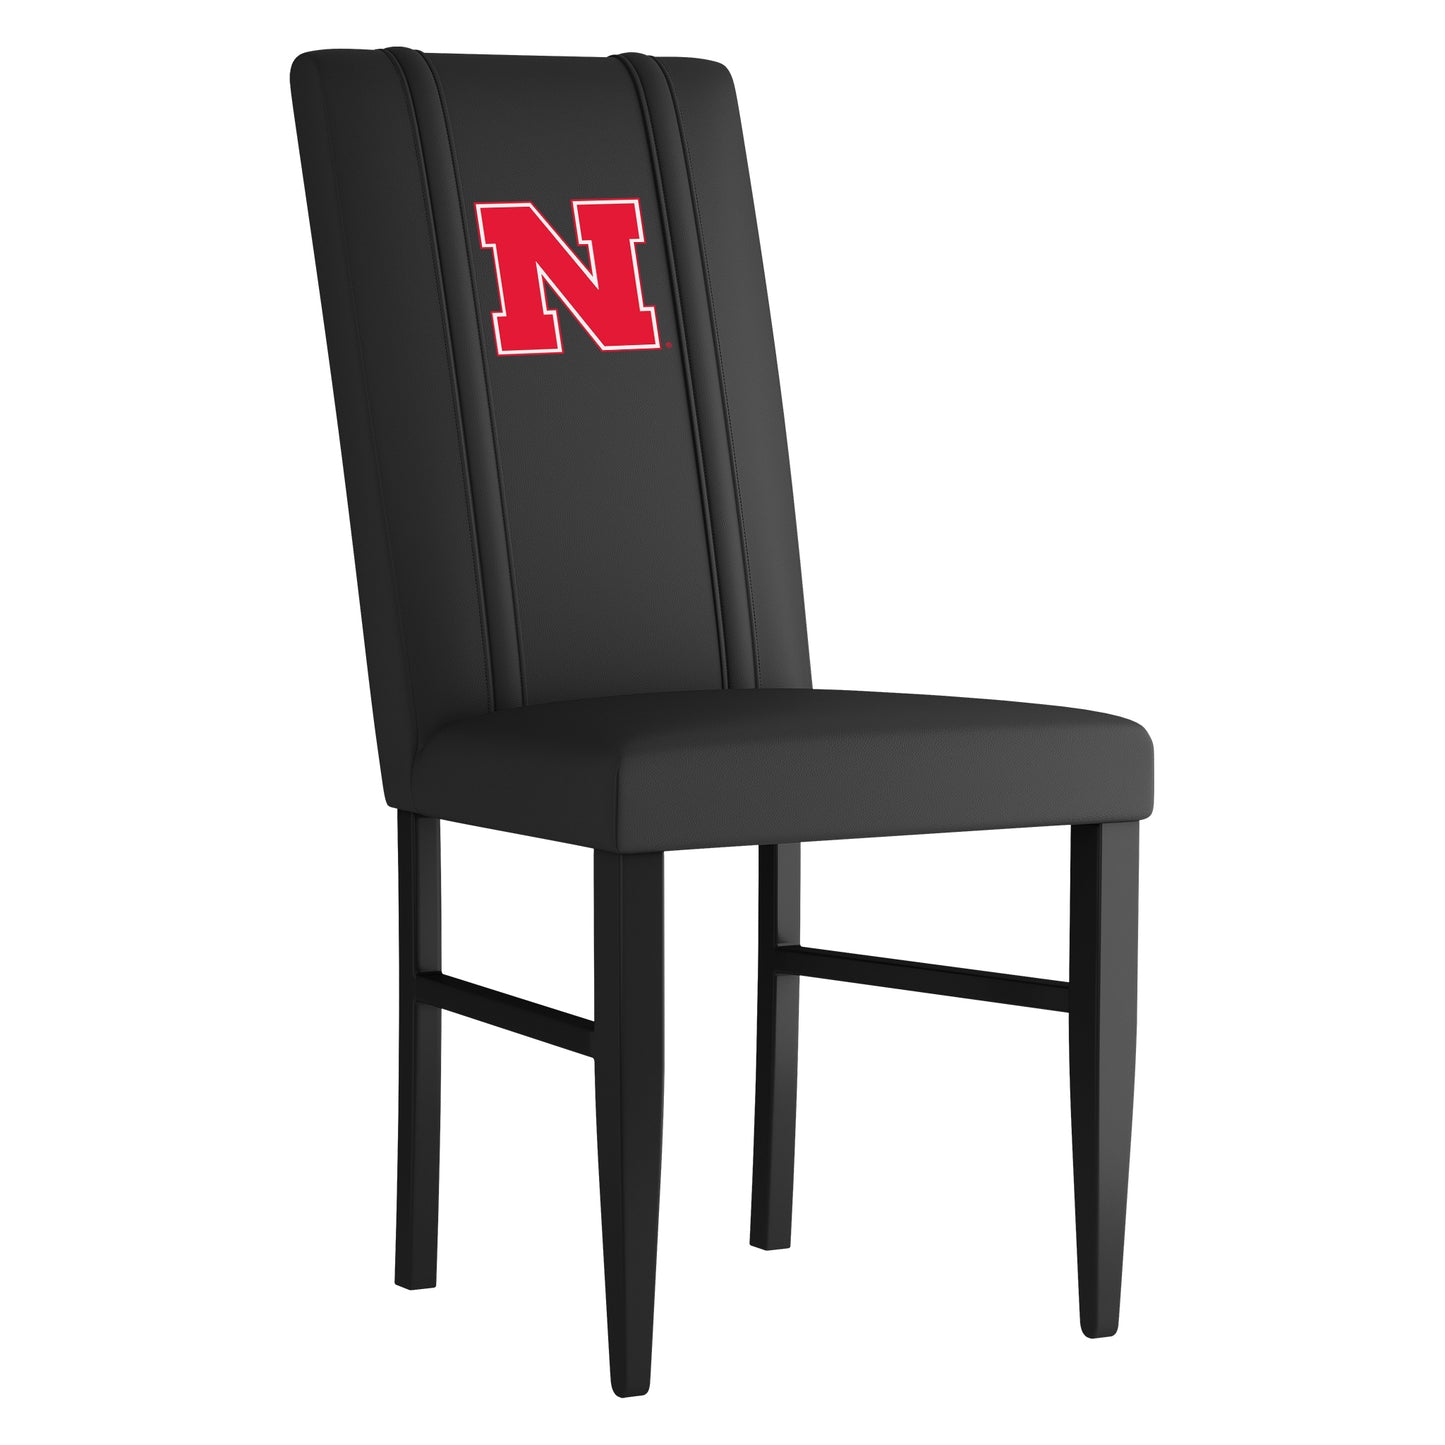 Side Chair 2000 with Nebraska Cornhuskers Primary Set of 2